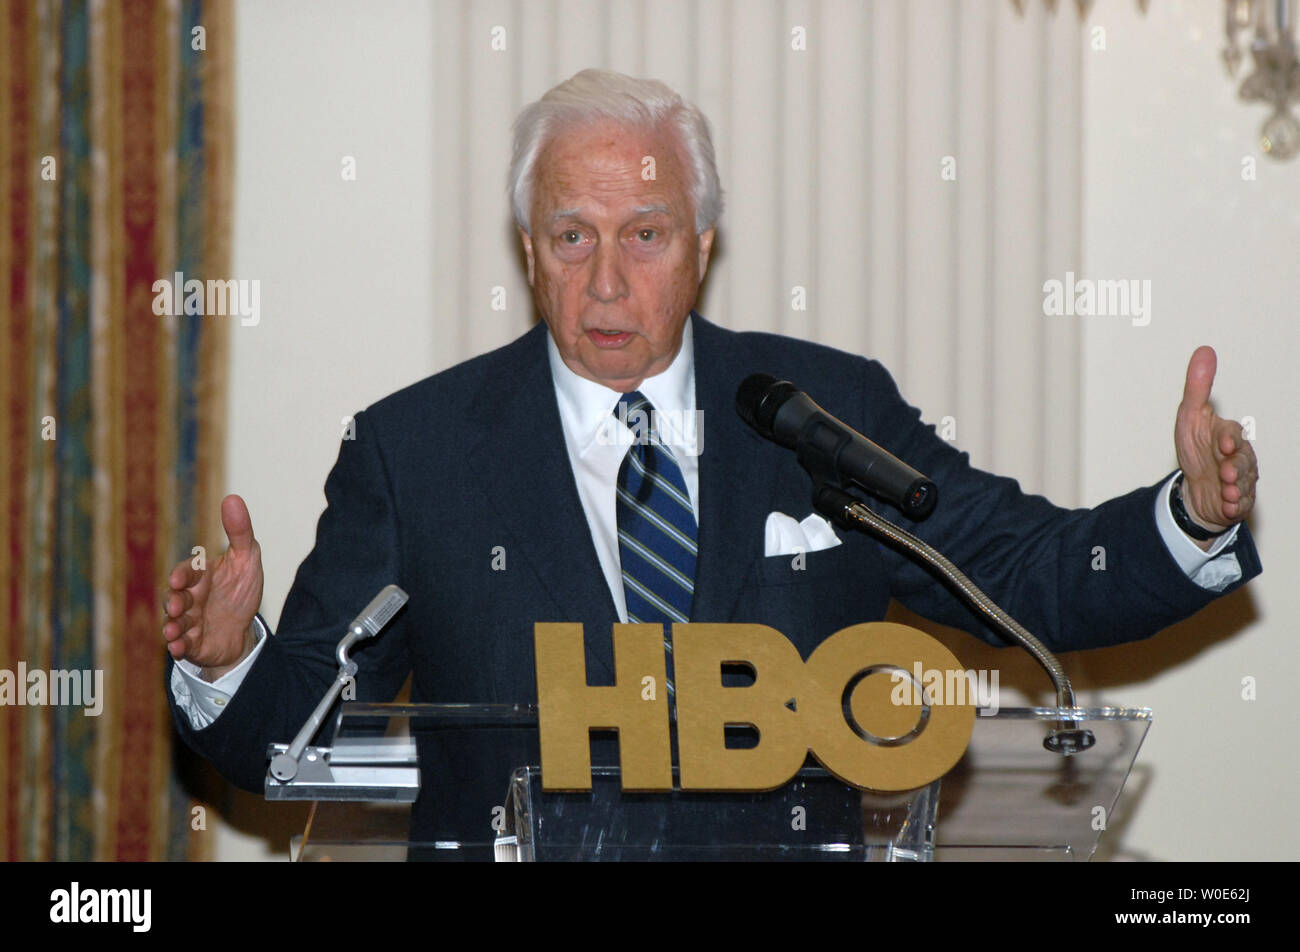 Author of the Pulitzer Prize winning book 'John Adams' David McCullough speaks before a screening of part of the HBO miniseries based on McCullough's book at the Cannon Building on Capitol Hill in Washington on March 5, 2008. (UPI Photo/Alexis C. Glenn) Stock Photo